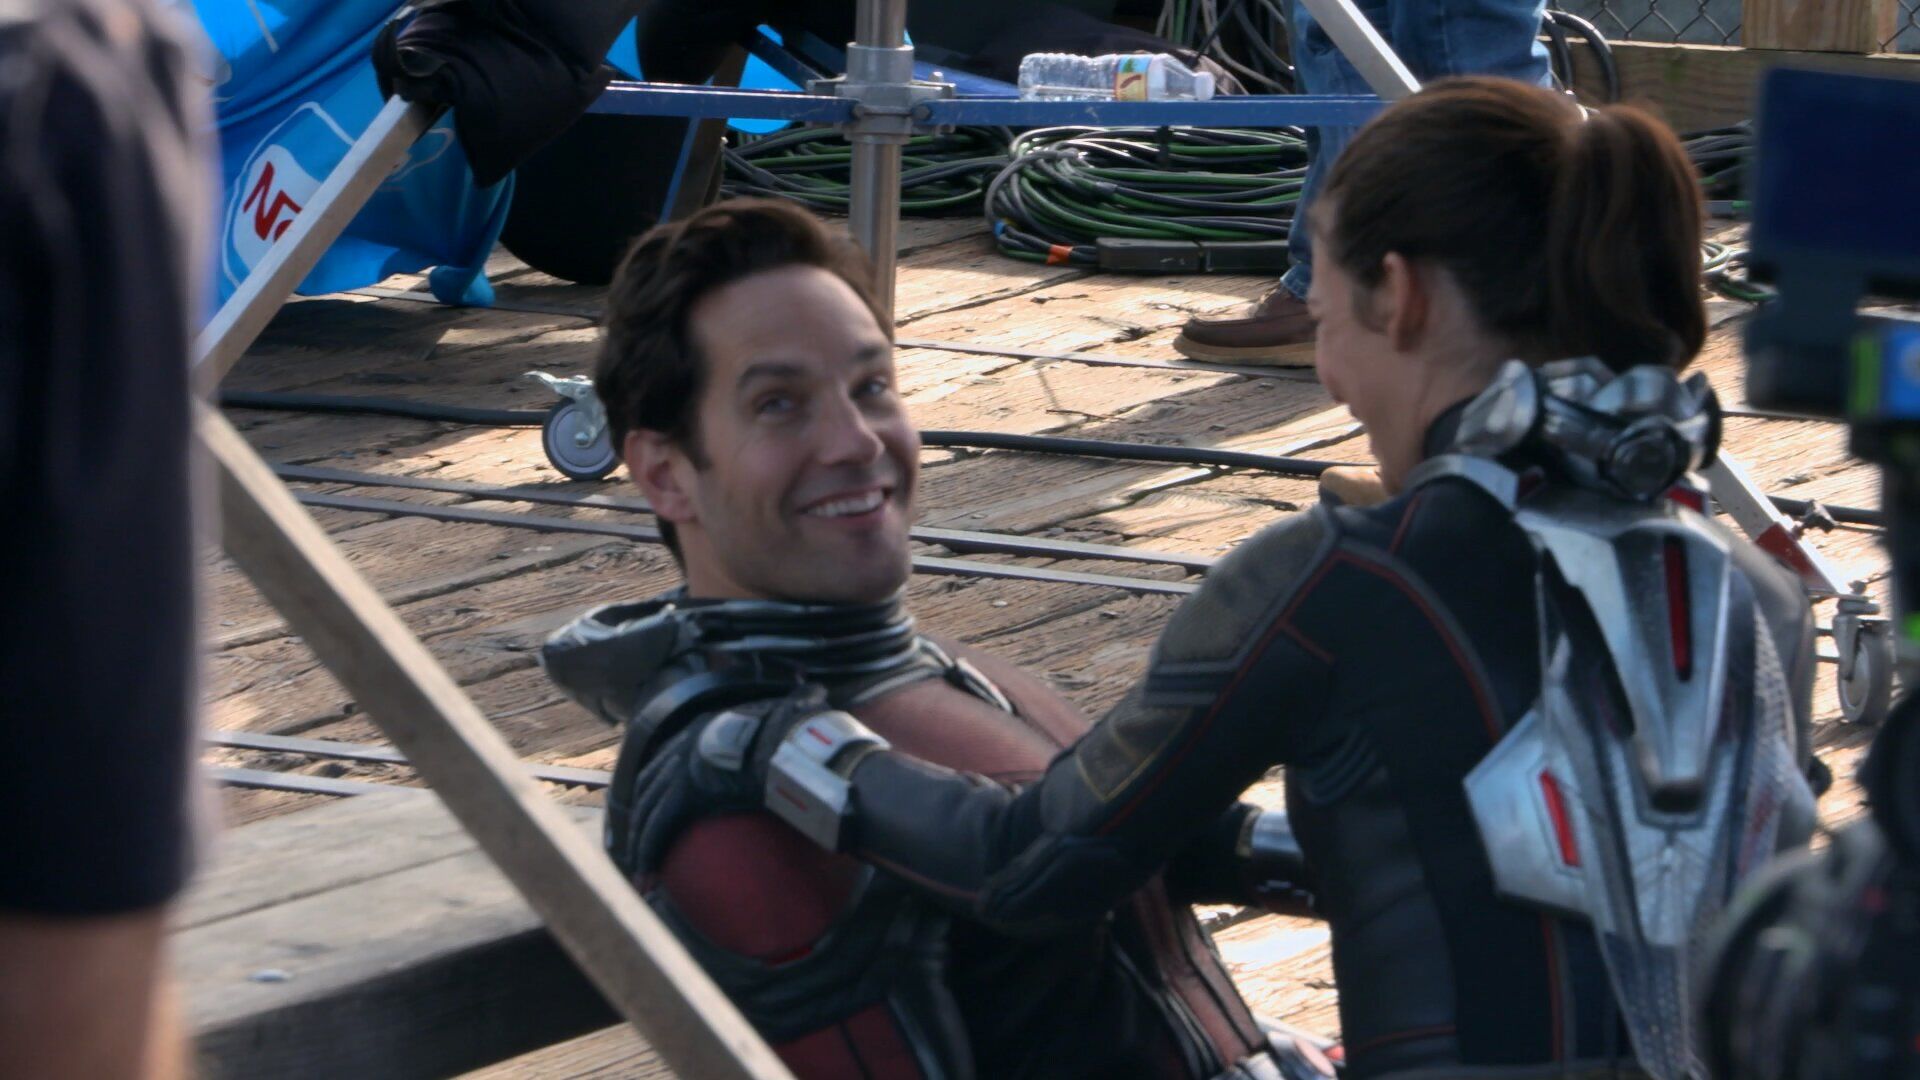 ANT MAN AND THE WASP Behind The Scenes Photo Reveal New Shots Of